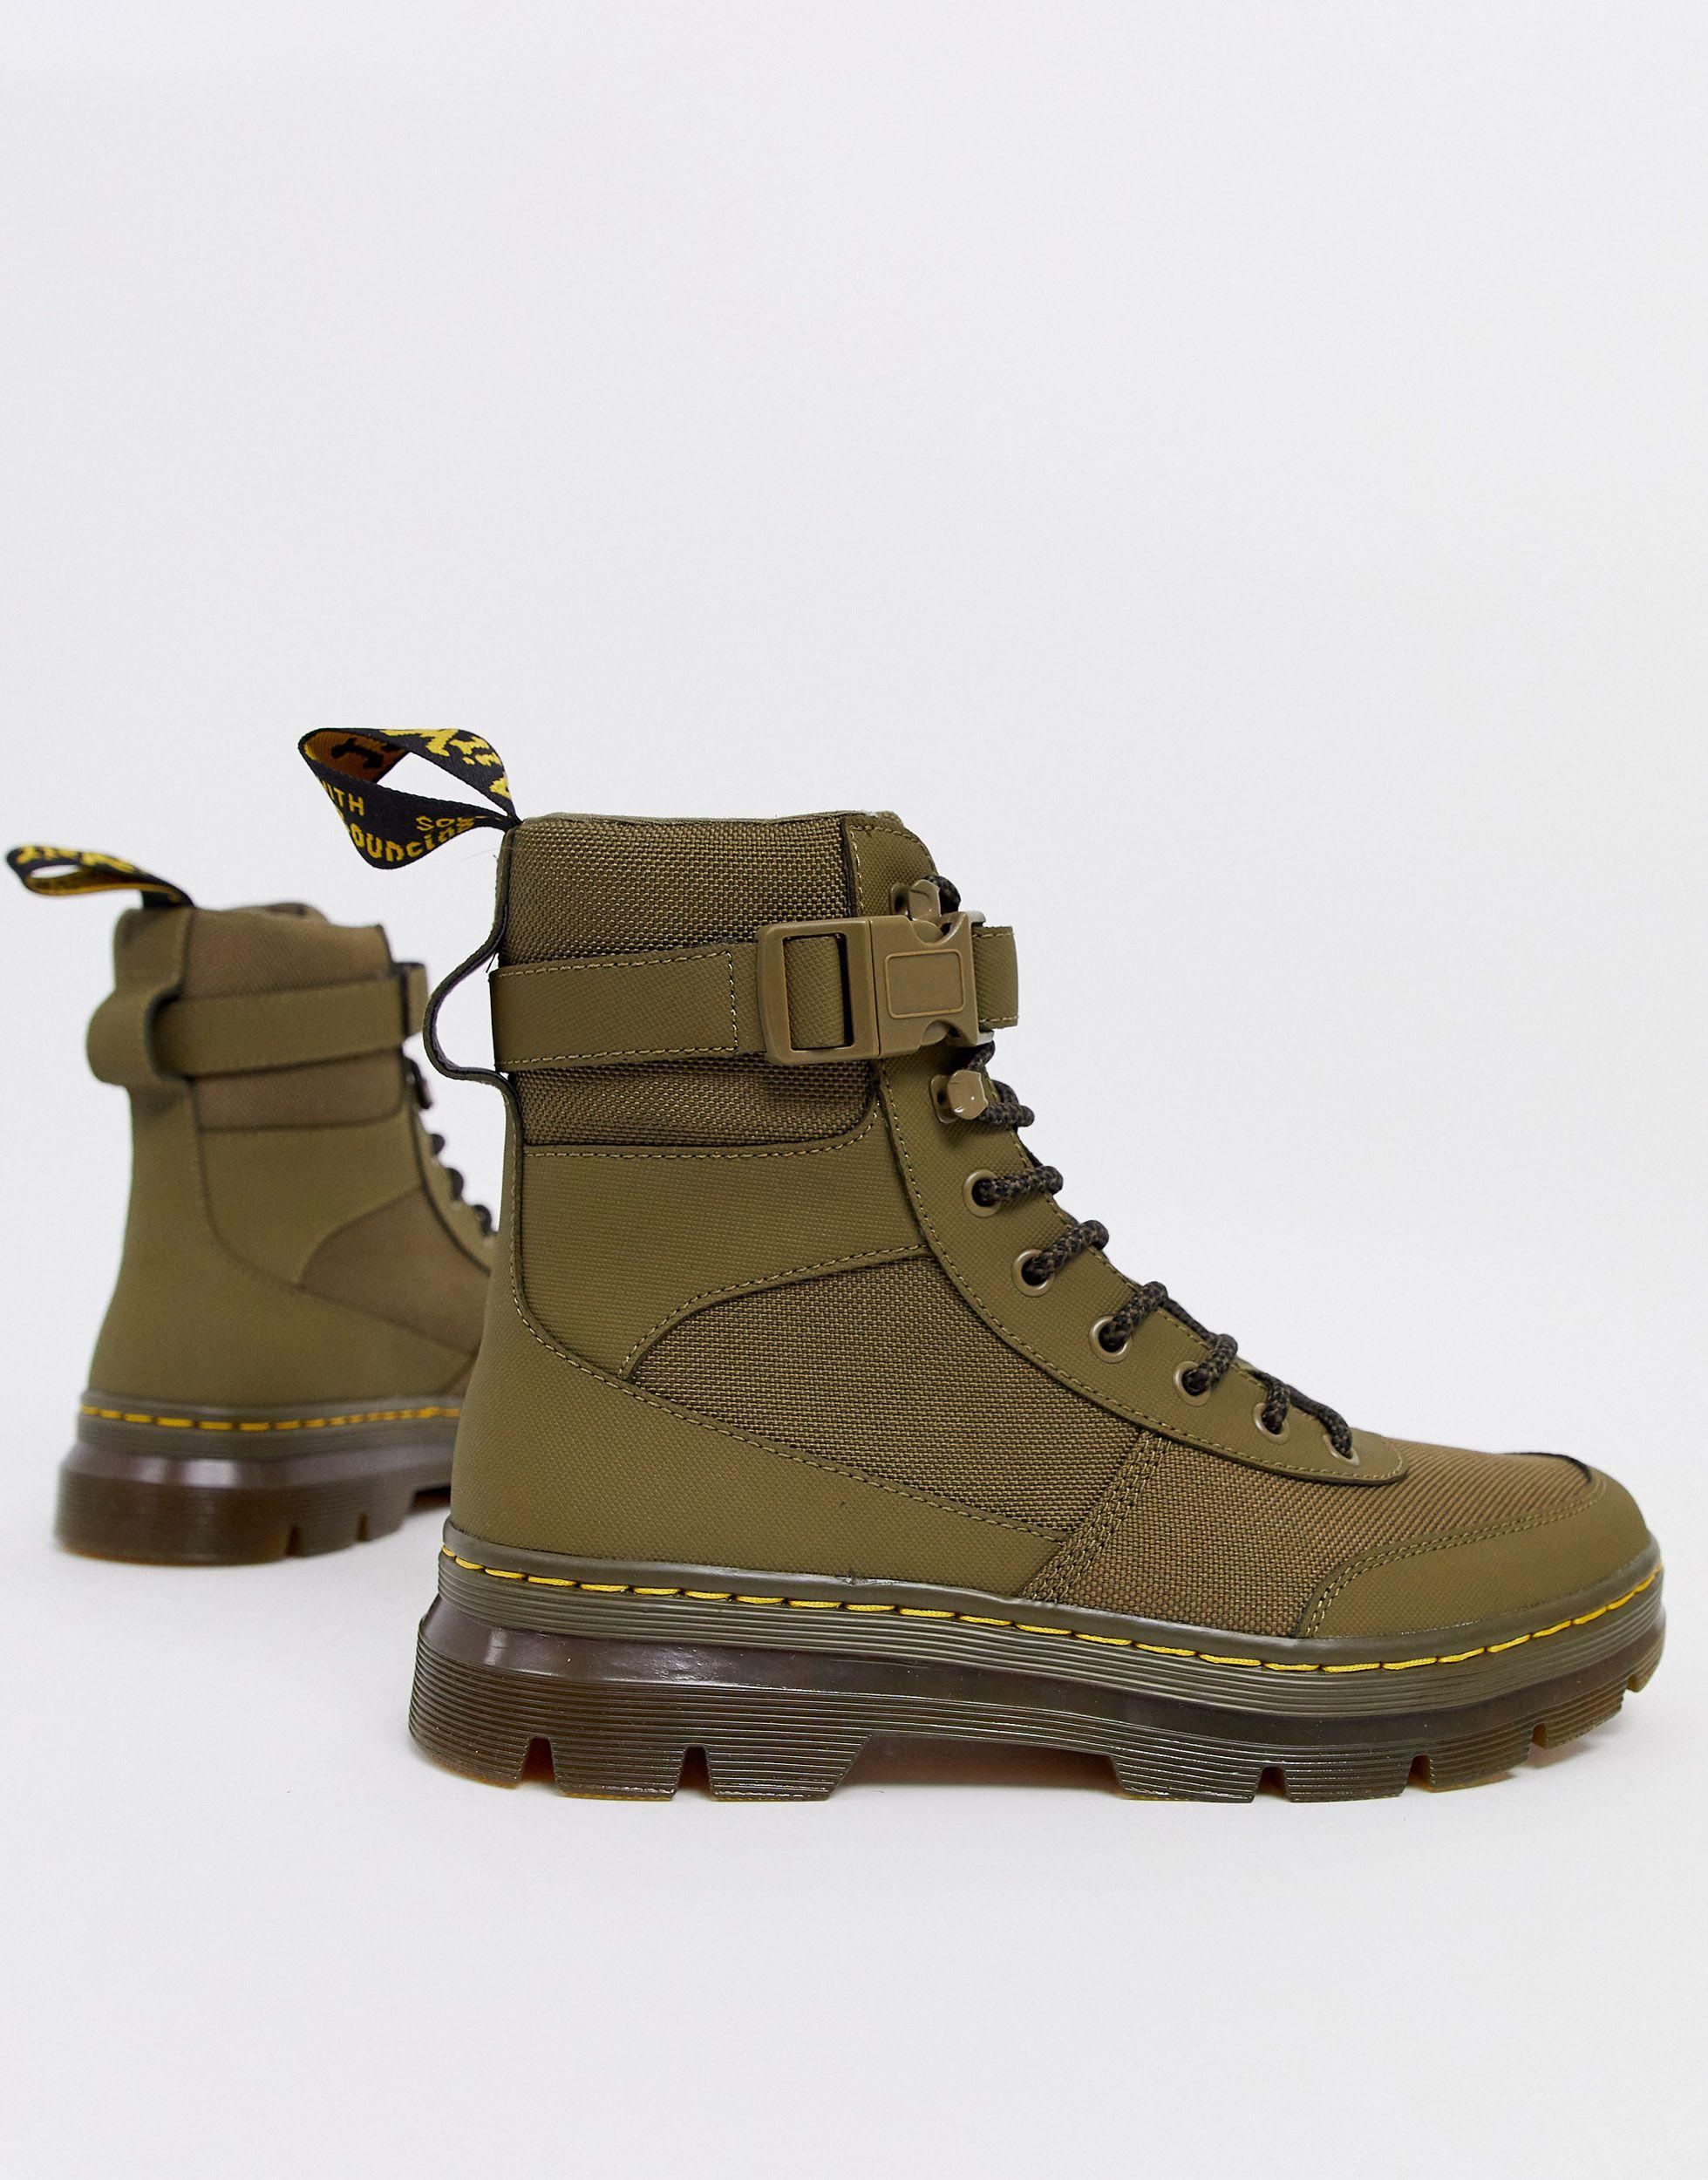 Dr. Martens Synthetic Combs Tech Boots in Olive (Green) for Men - Lyst